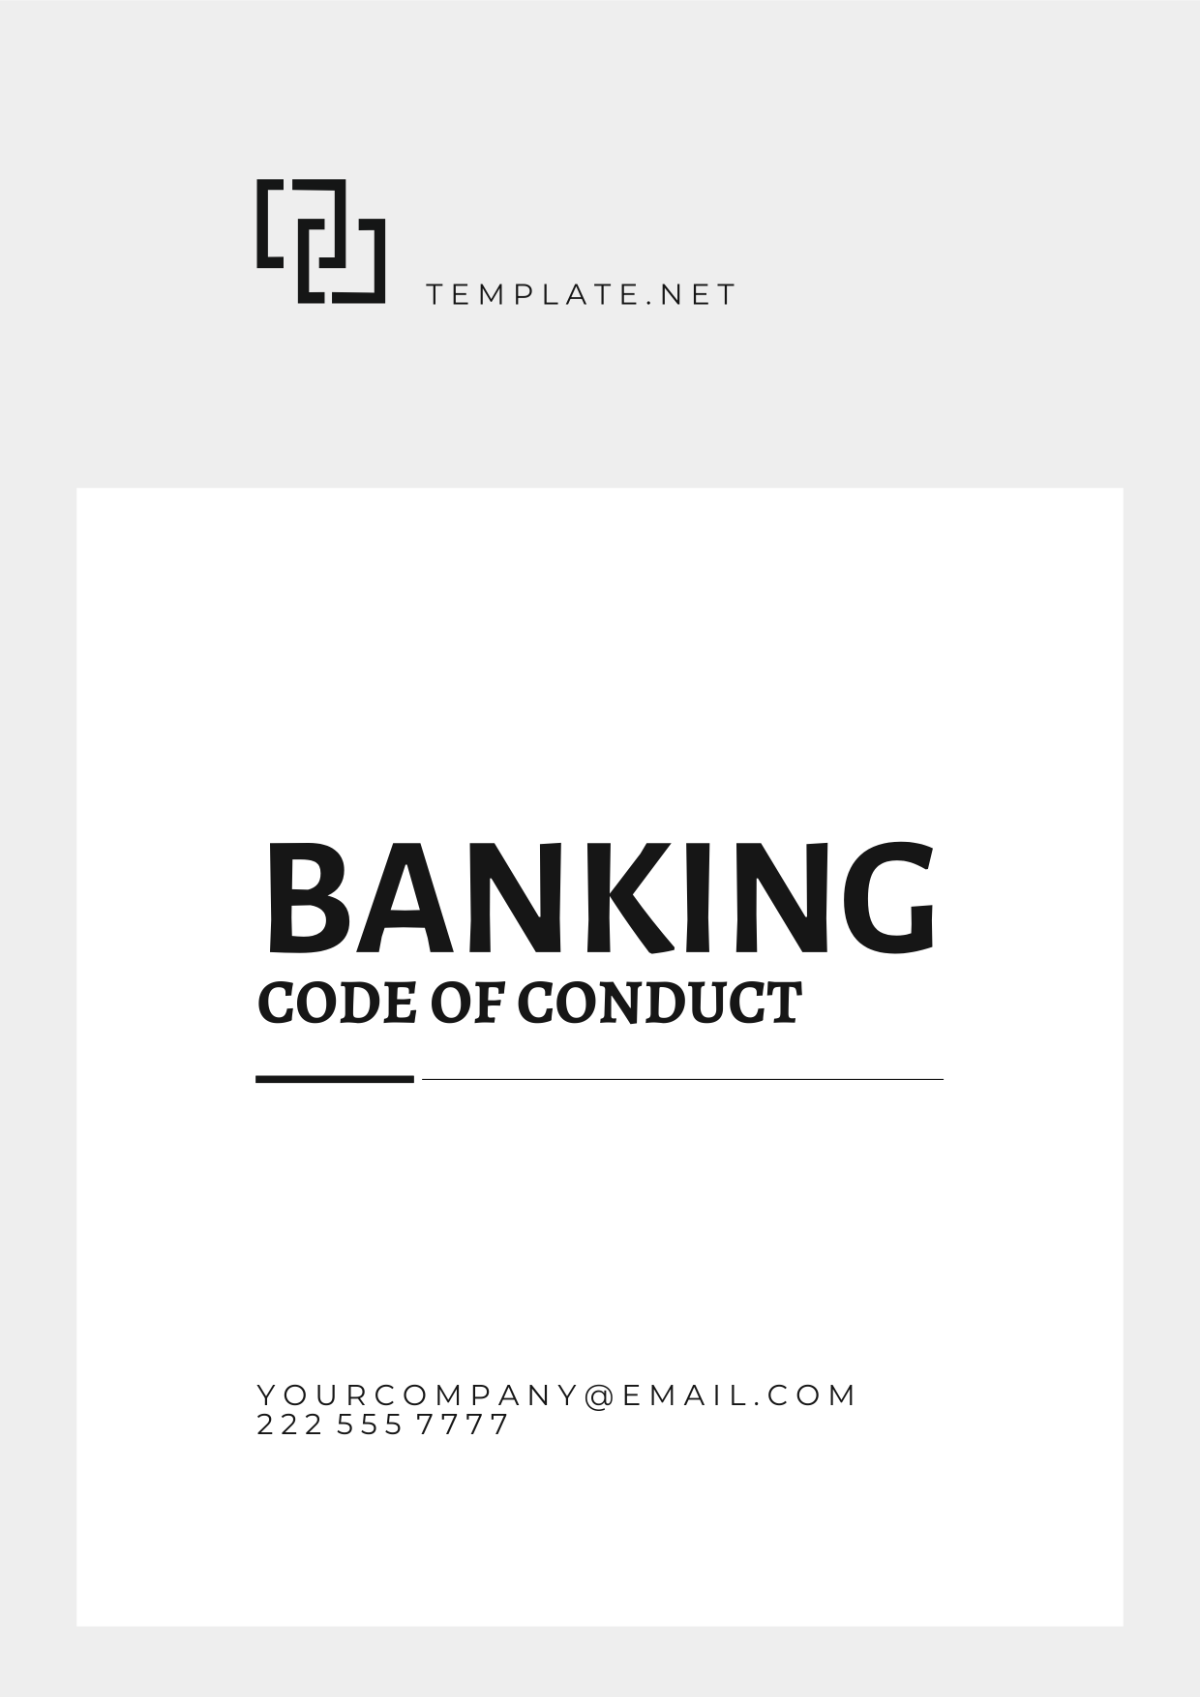 Banking Code of Conduct Template